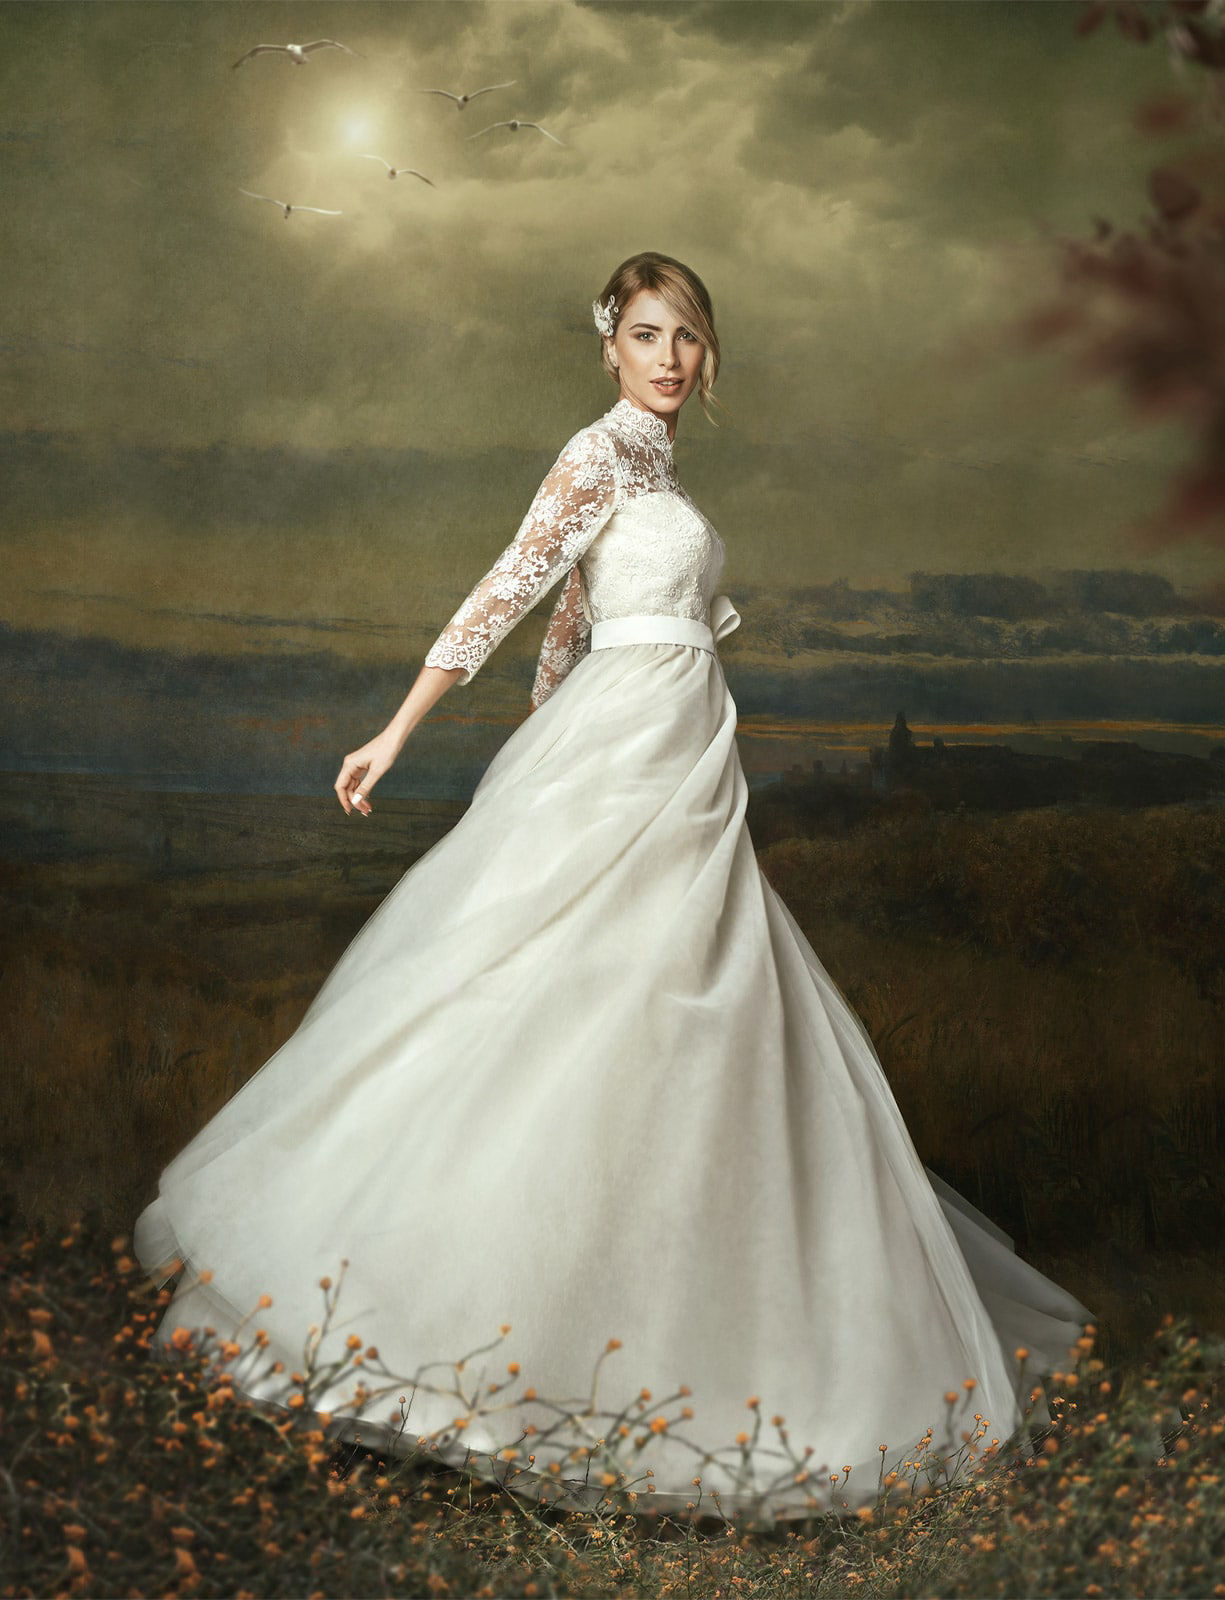 Painterly image of a model wearing a white dress dancing in a green land at sunset